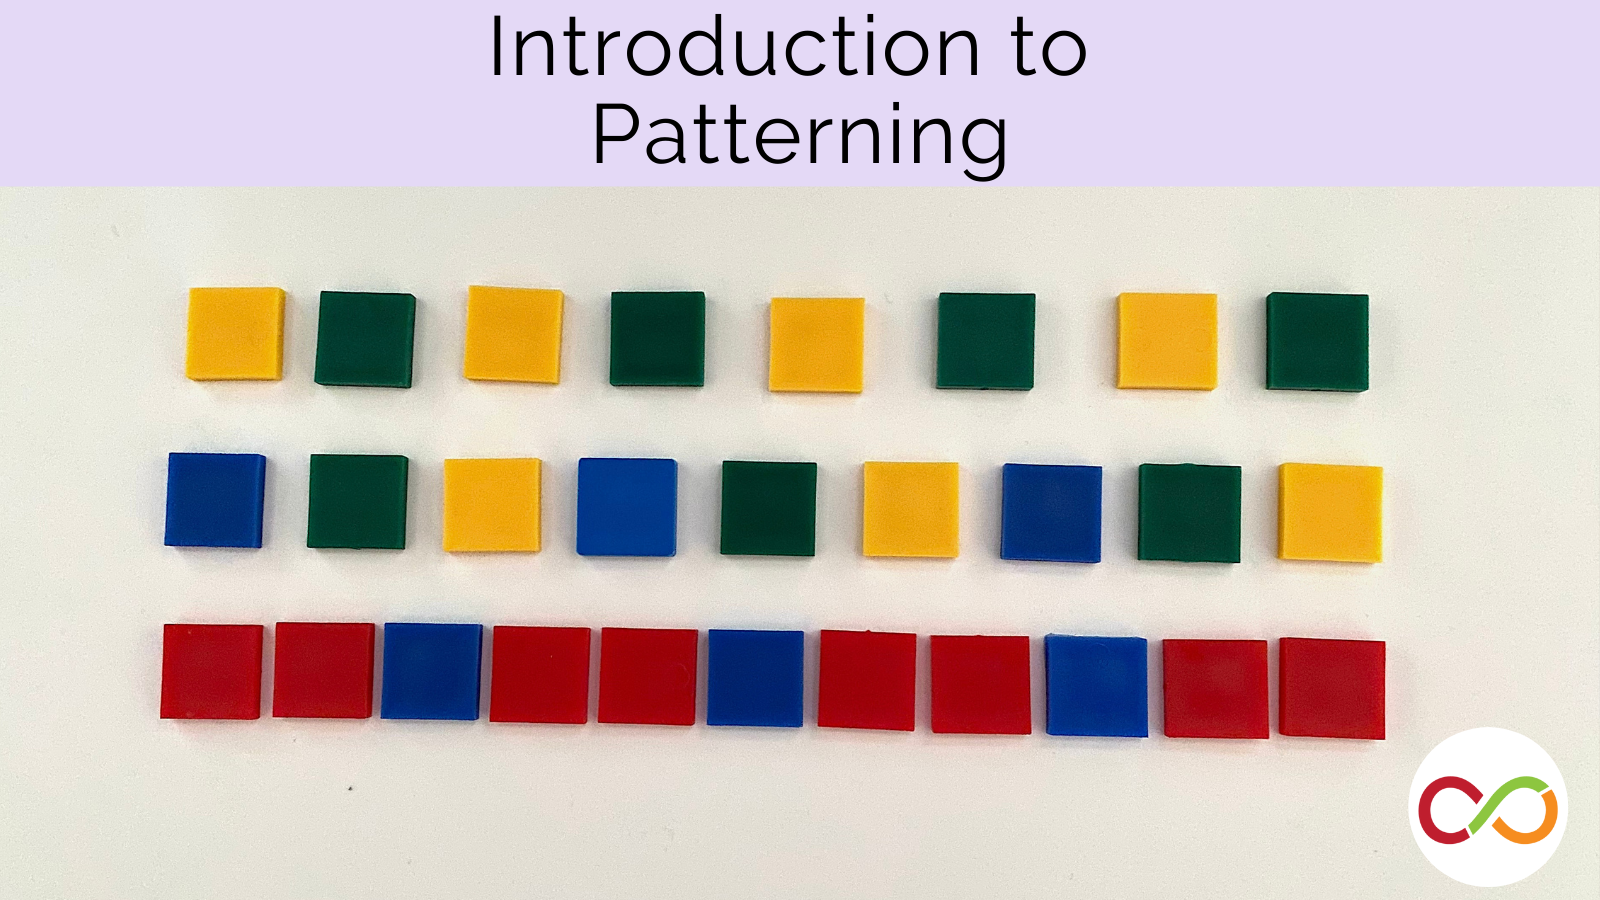 An image linking to the Introduction to Patterning lesson